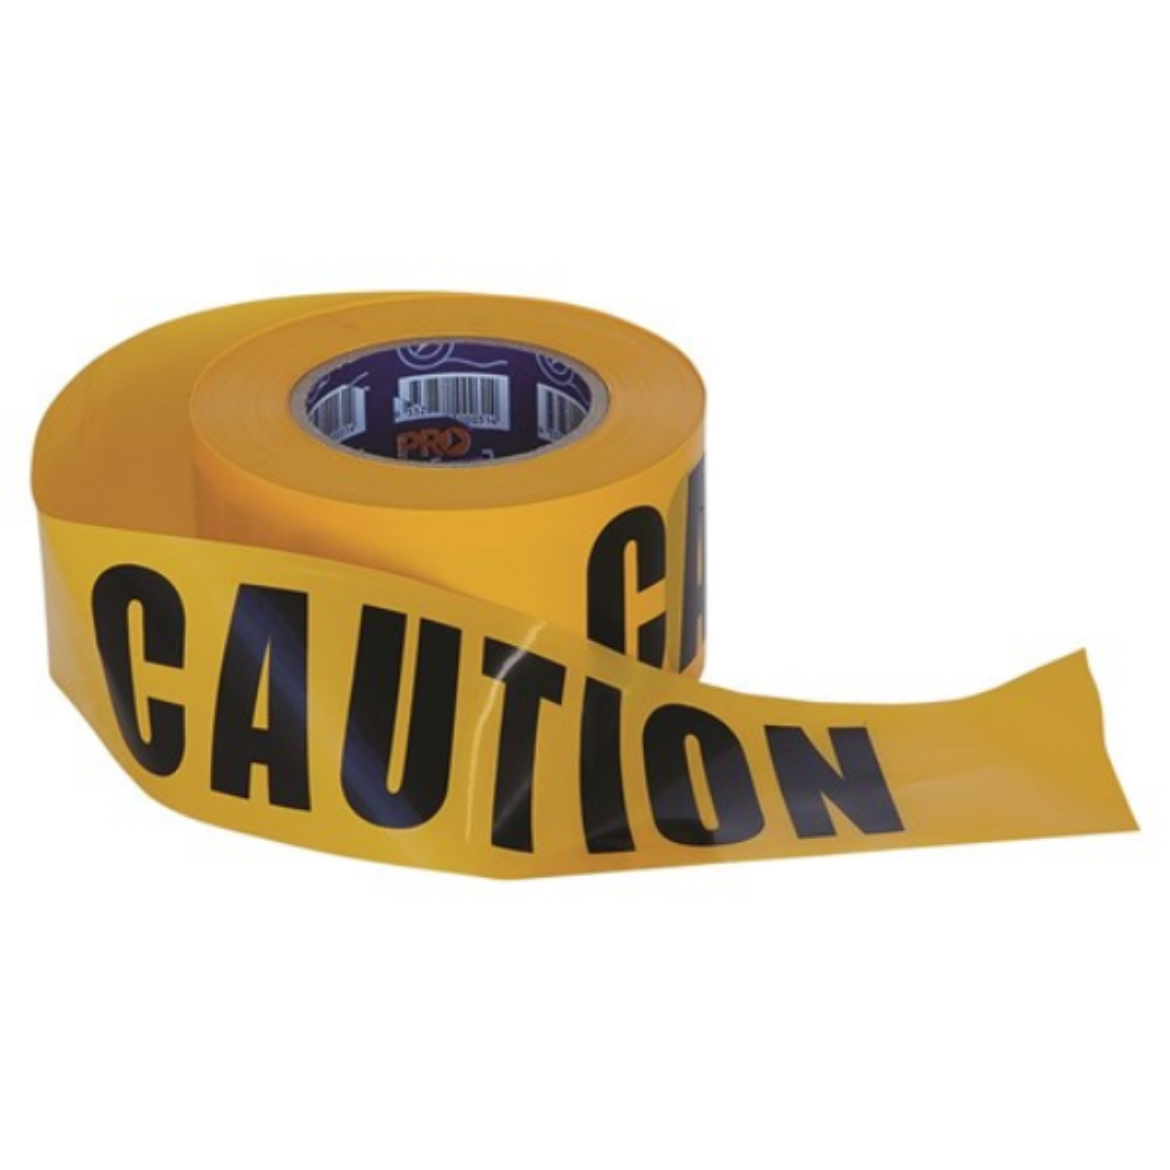 Picture of "CAUTION" ON YELLOW HAZARD TAPE - 100M X 75MM